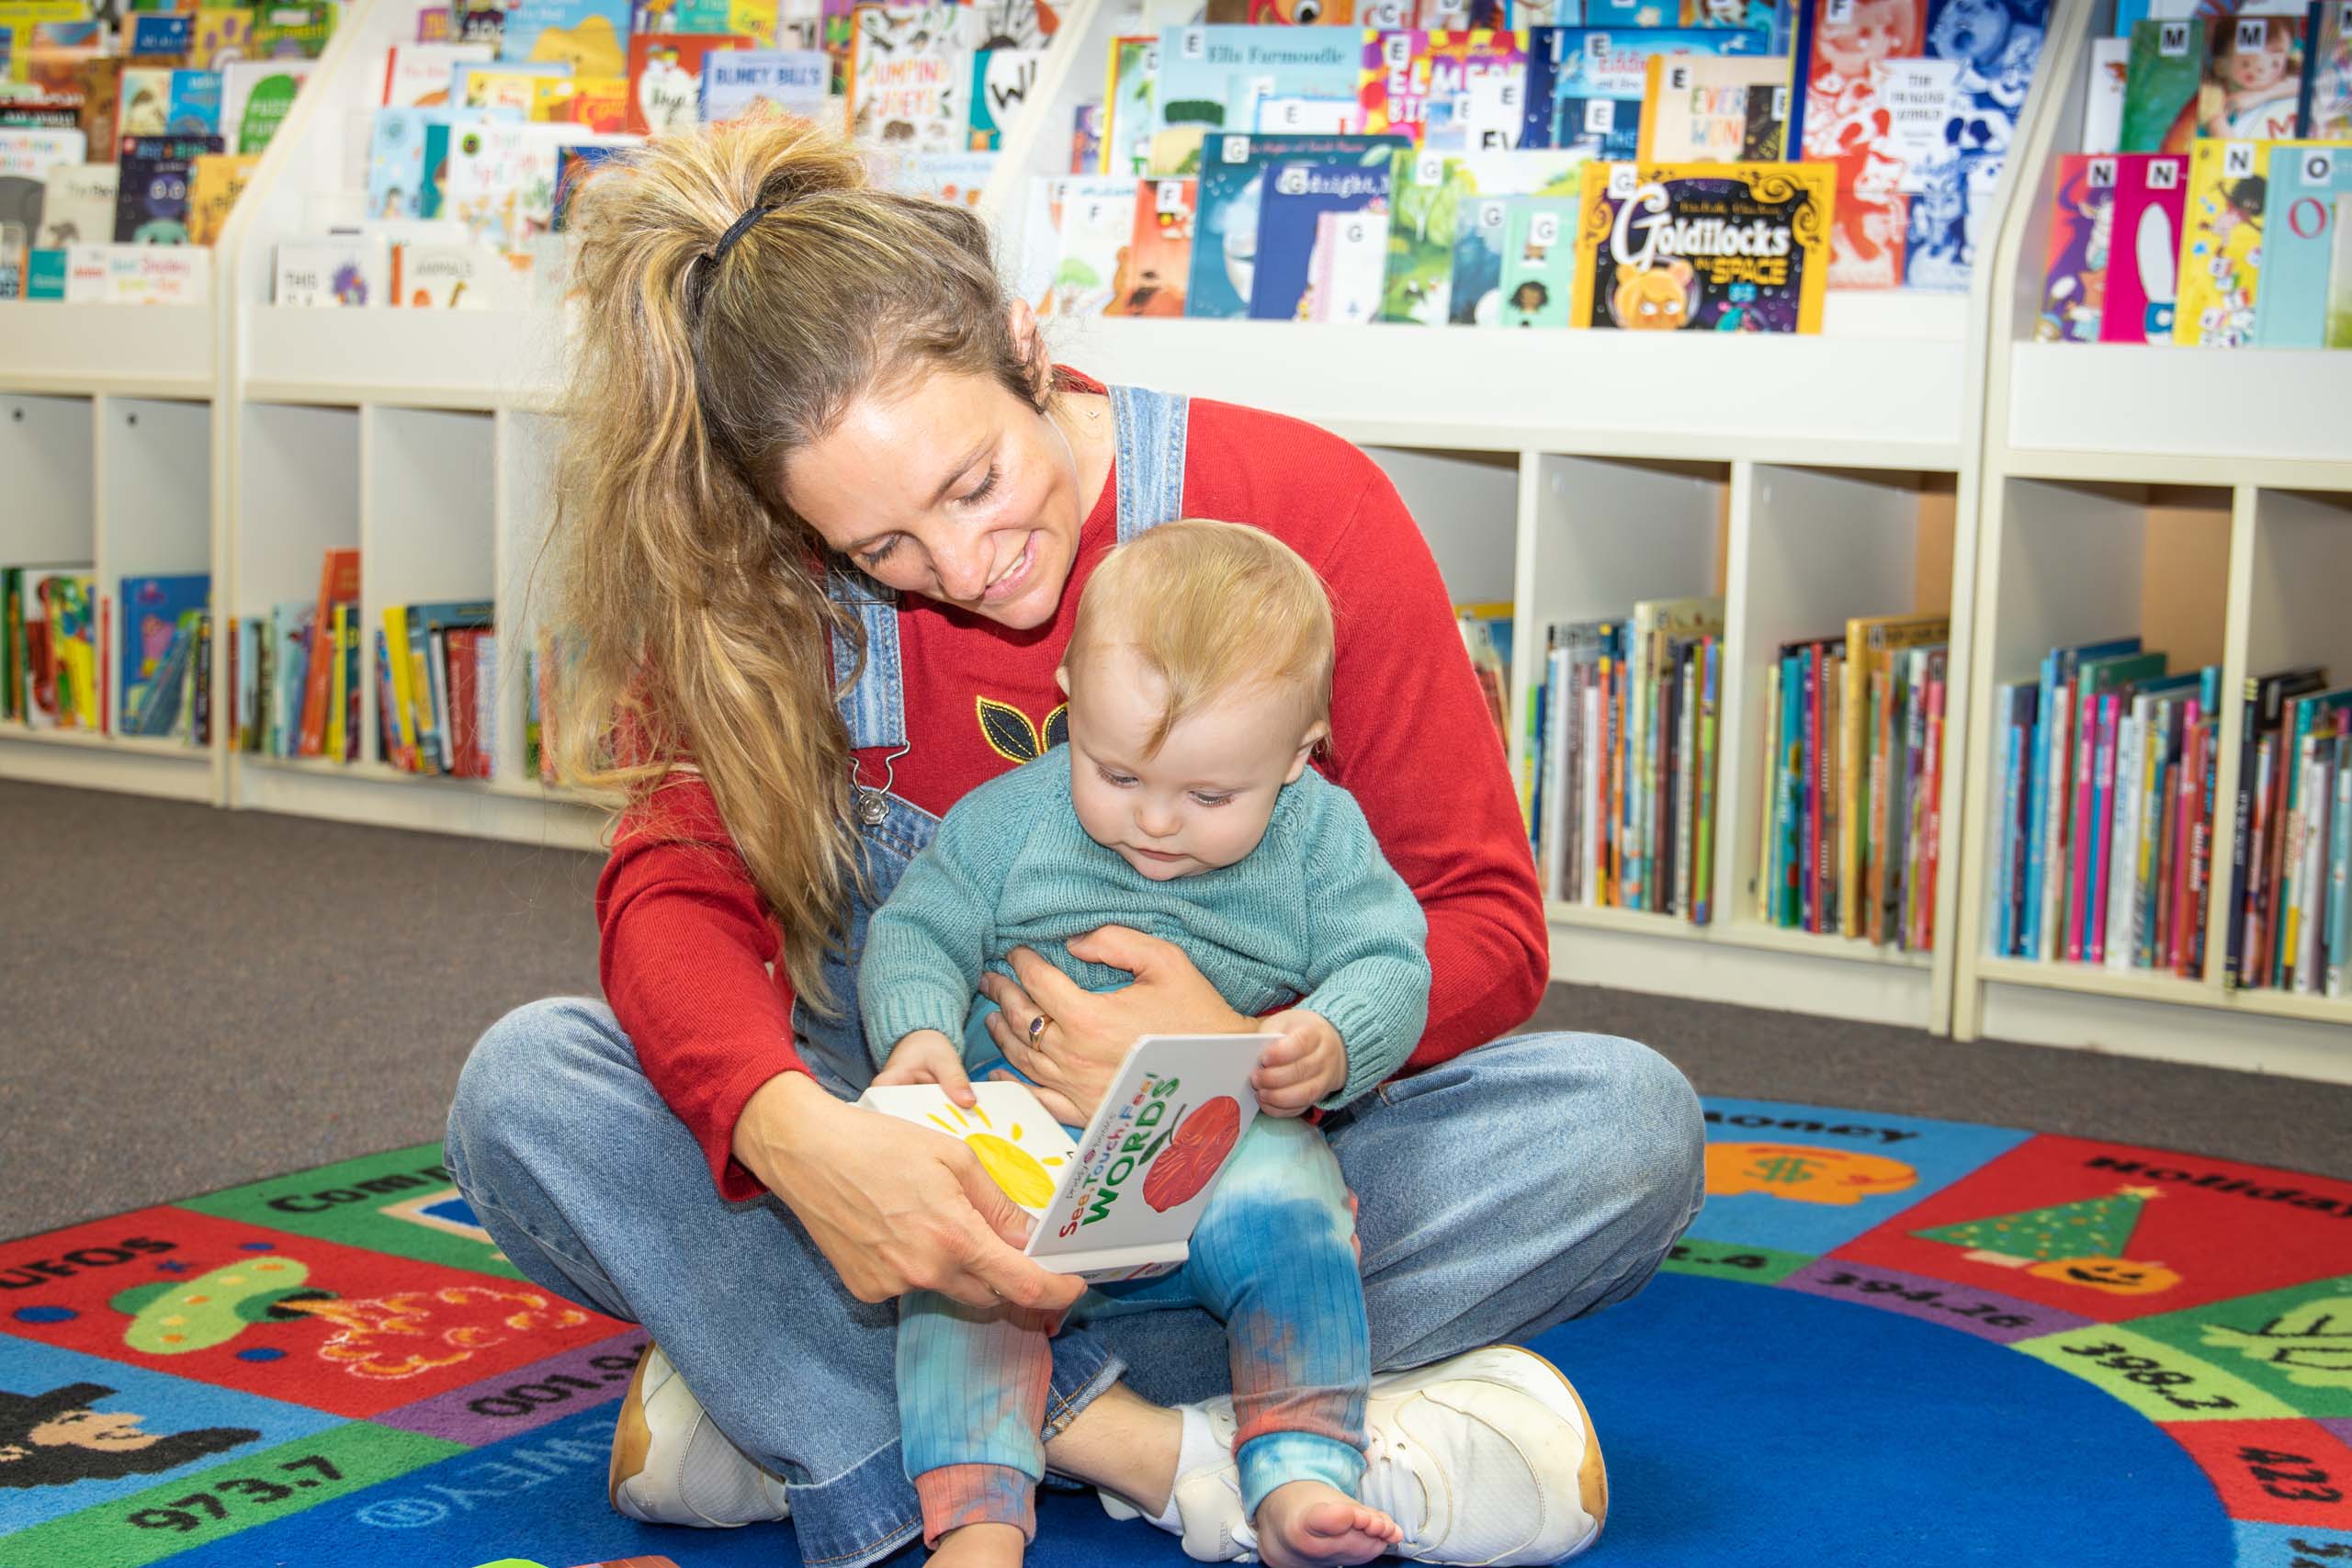 Rhymetime is held at Caringbah Library on Thursday mornings at 11am during school terms. Suitable for babies aged 0 to 24 months and their parents.